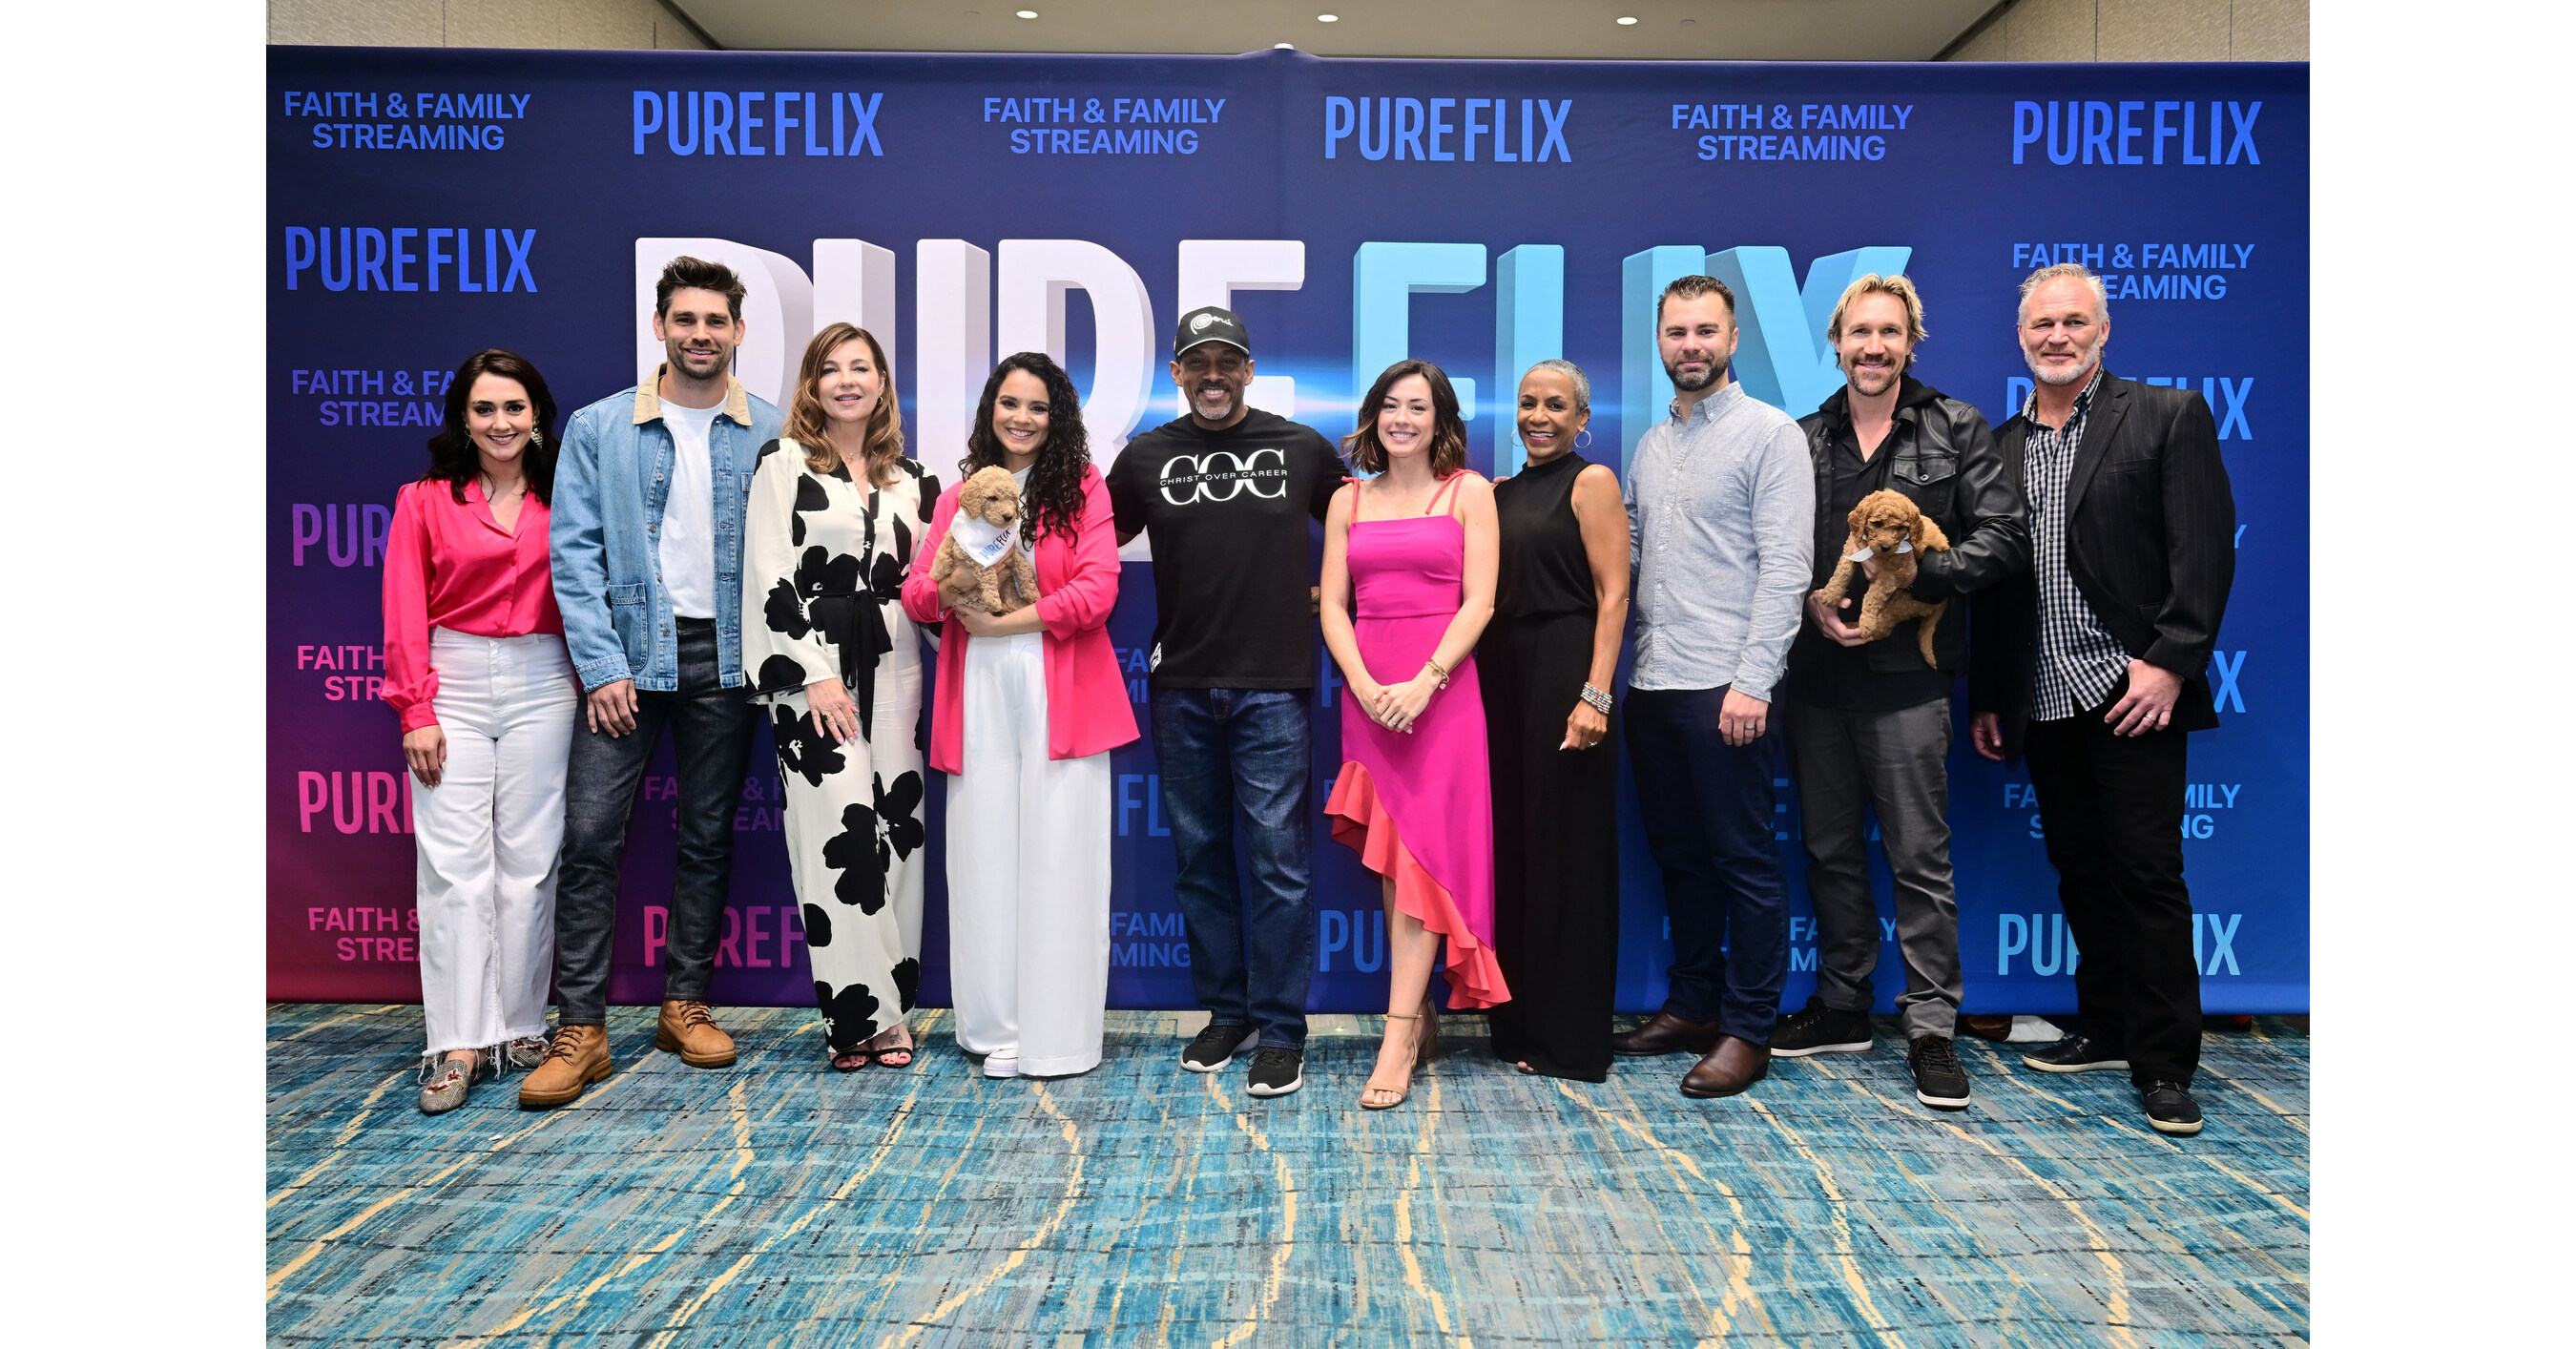 PURE FLIX MAKES A SPLASH AT NRB WITH IMPRESSIVE LINEUP OF MOVIES